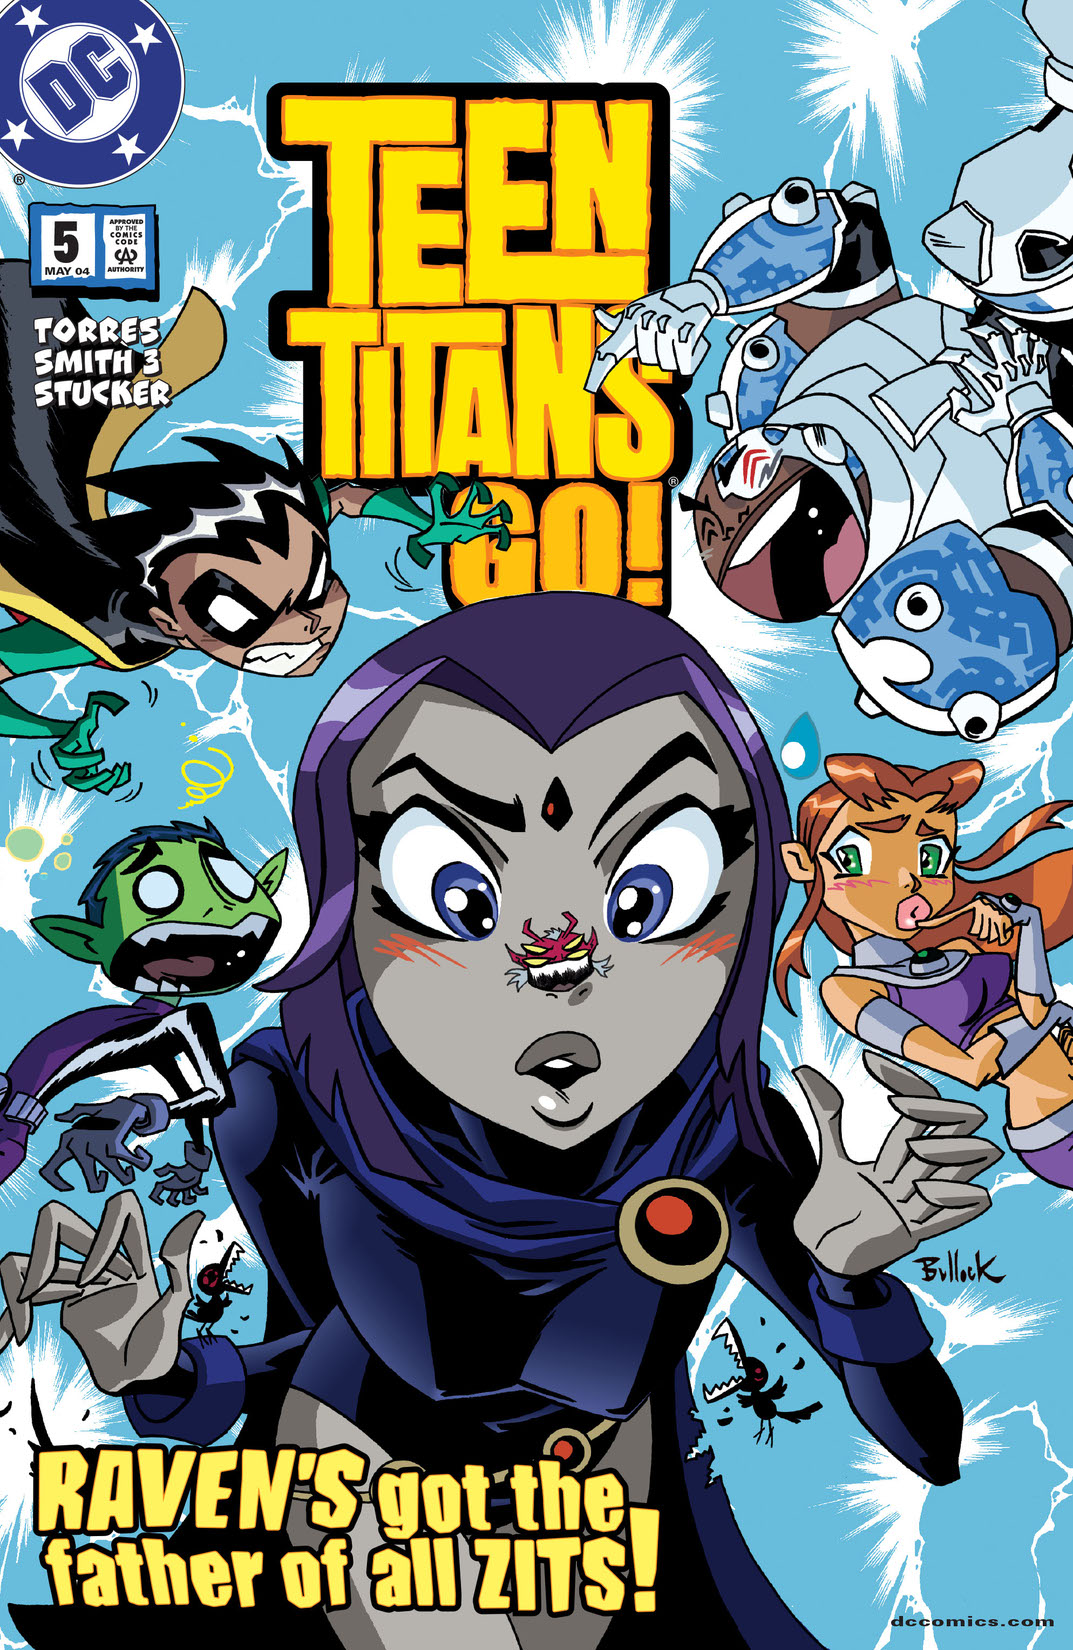 Teen Titans Go! (2003-) #5 preview images